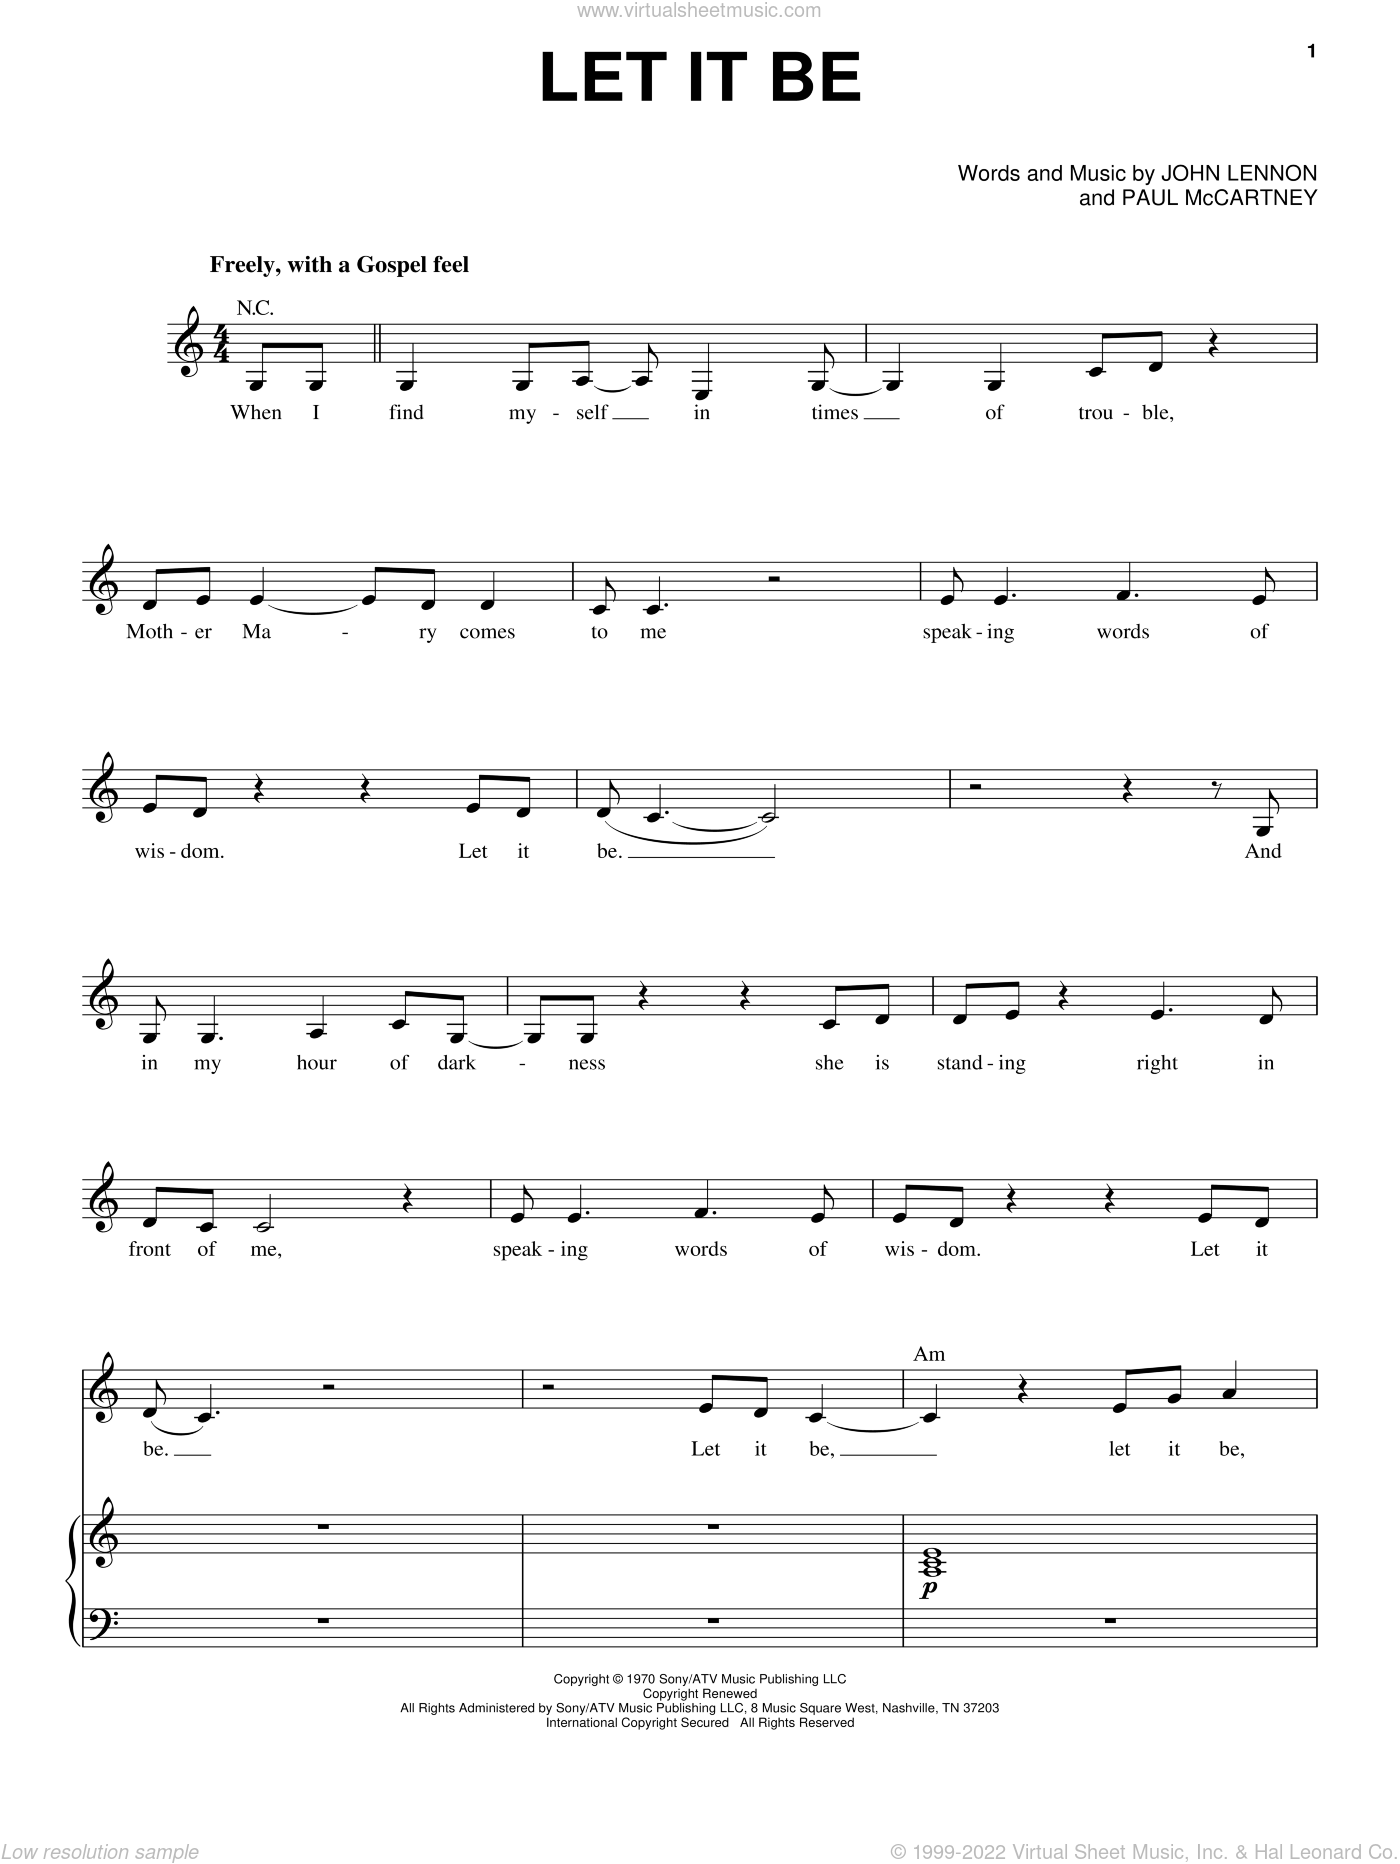 Beatles - Let It Be sheet music for voice and piano [PDF]